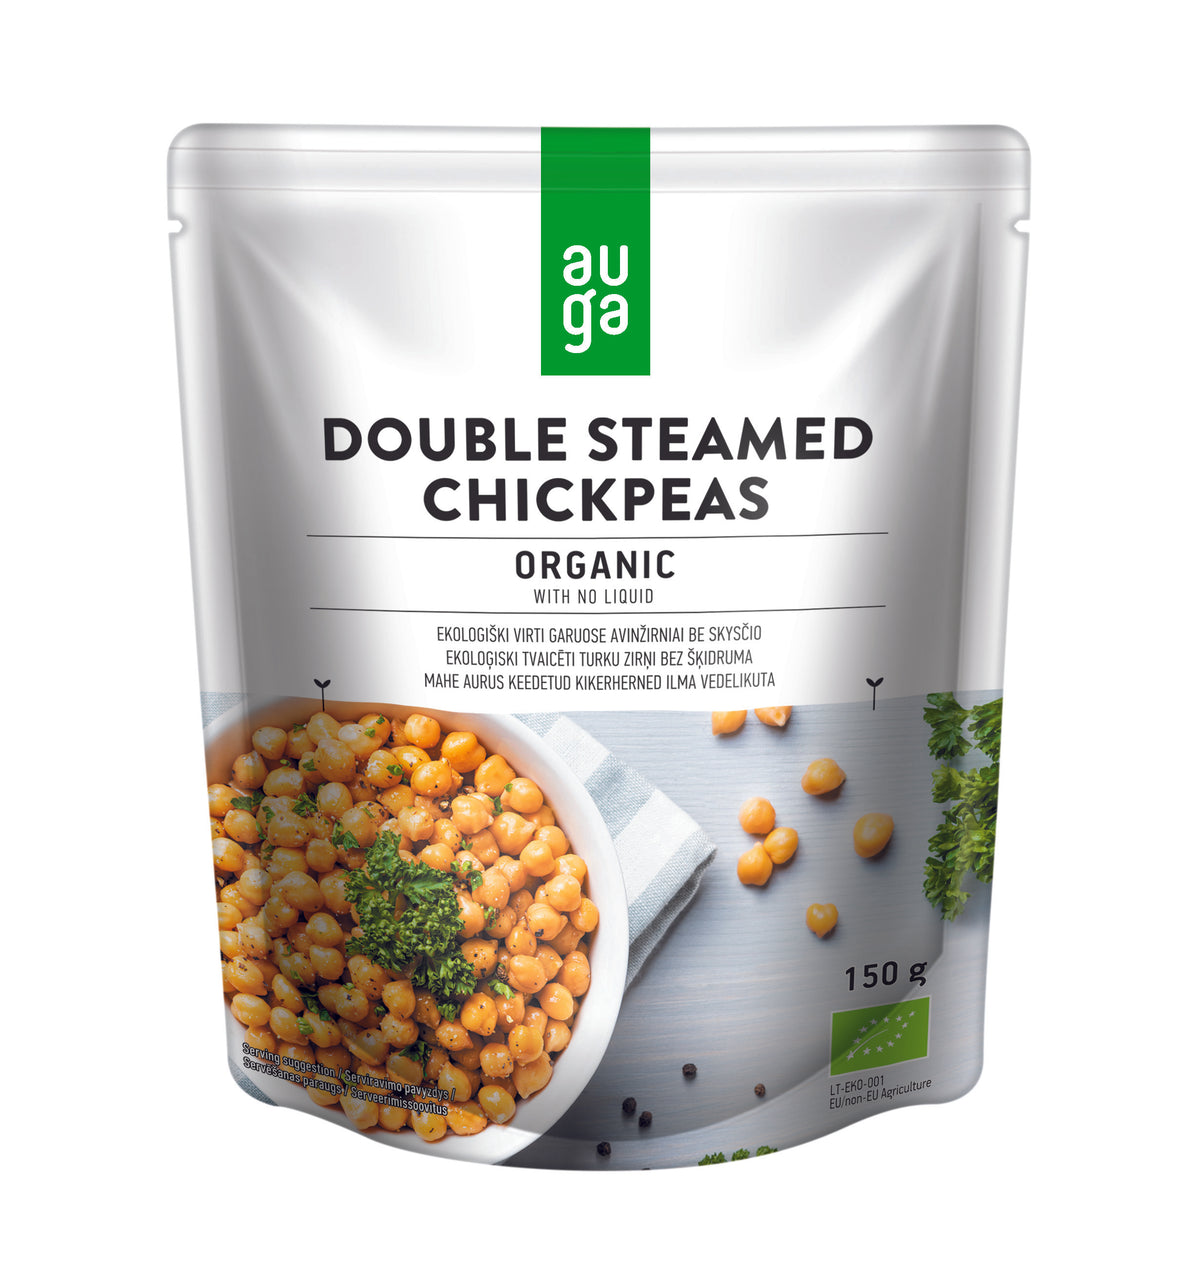 Auga organic double streamed chickpeas 150g